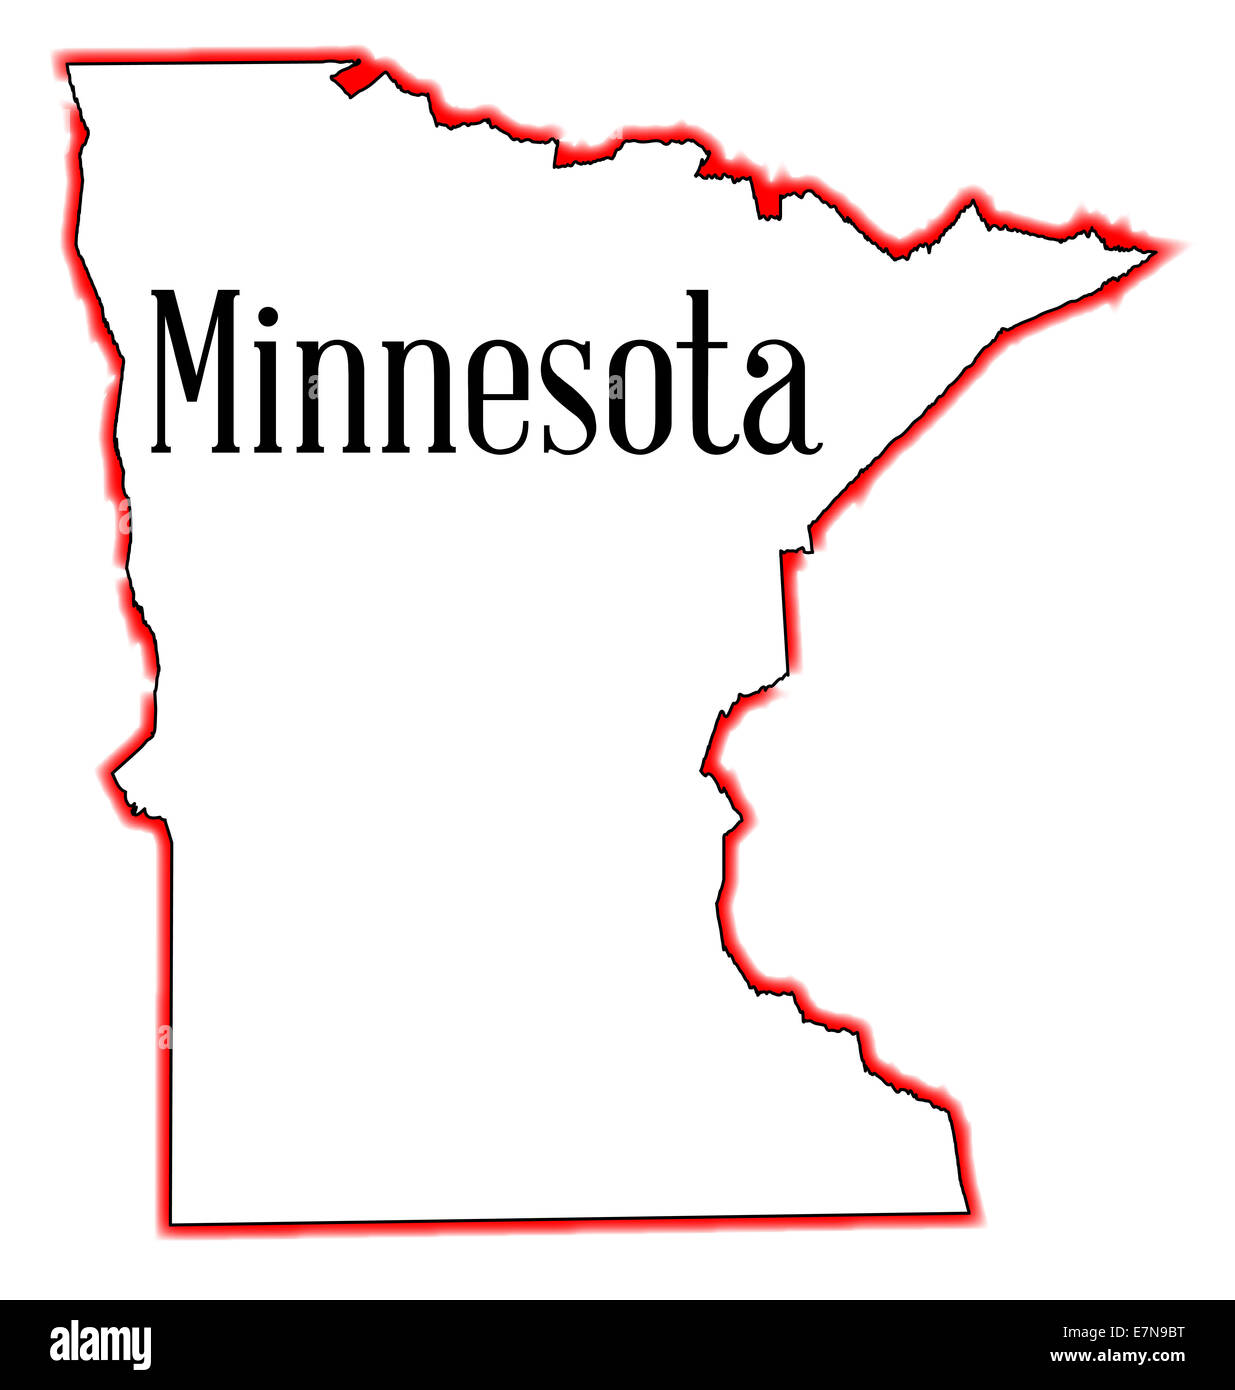 An outline map of Minnesota isolated on a white background Stock Photo